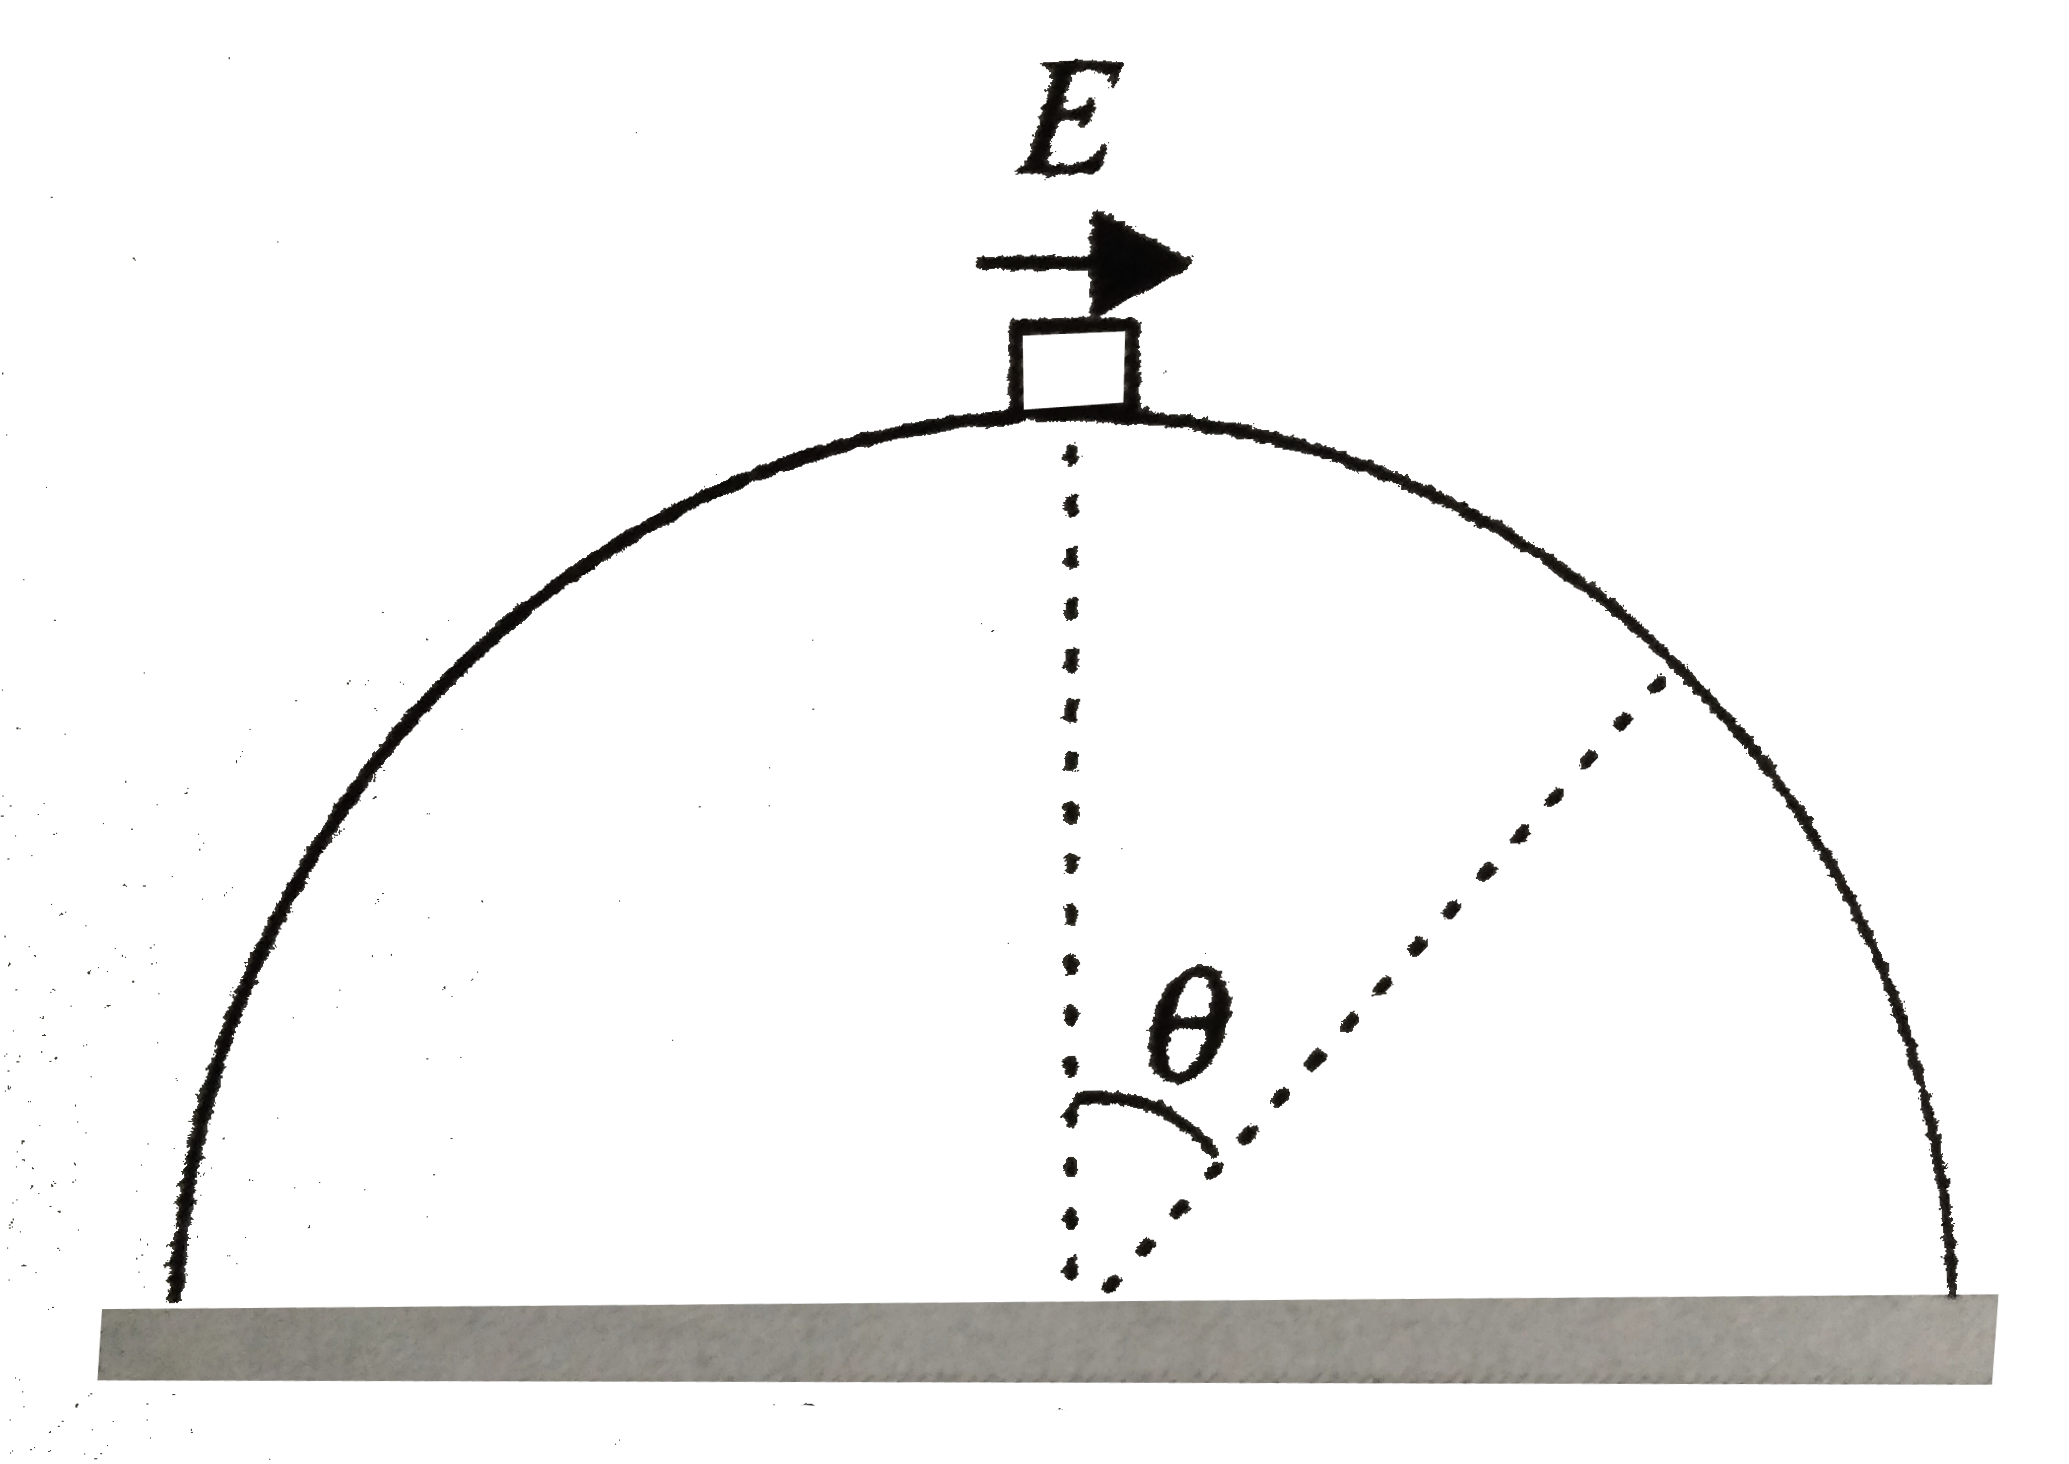 In a horizontal unifrom electirc field, a small charged disk is gently released on the top of a fixed sperical dome. The disk slides down the some without friction and breaks away from the surface of the dome at the angular position theta = sin^(-1)(3//5) from verical. Determine the  ration of the force of gravity acting on the disk to force of its interaction with the field .